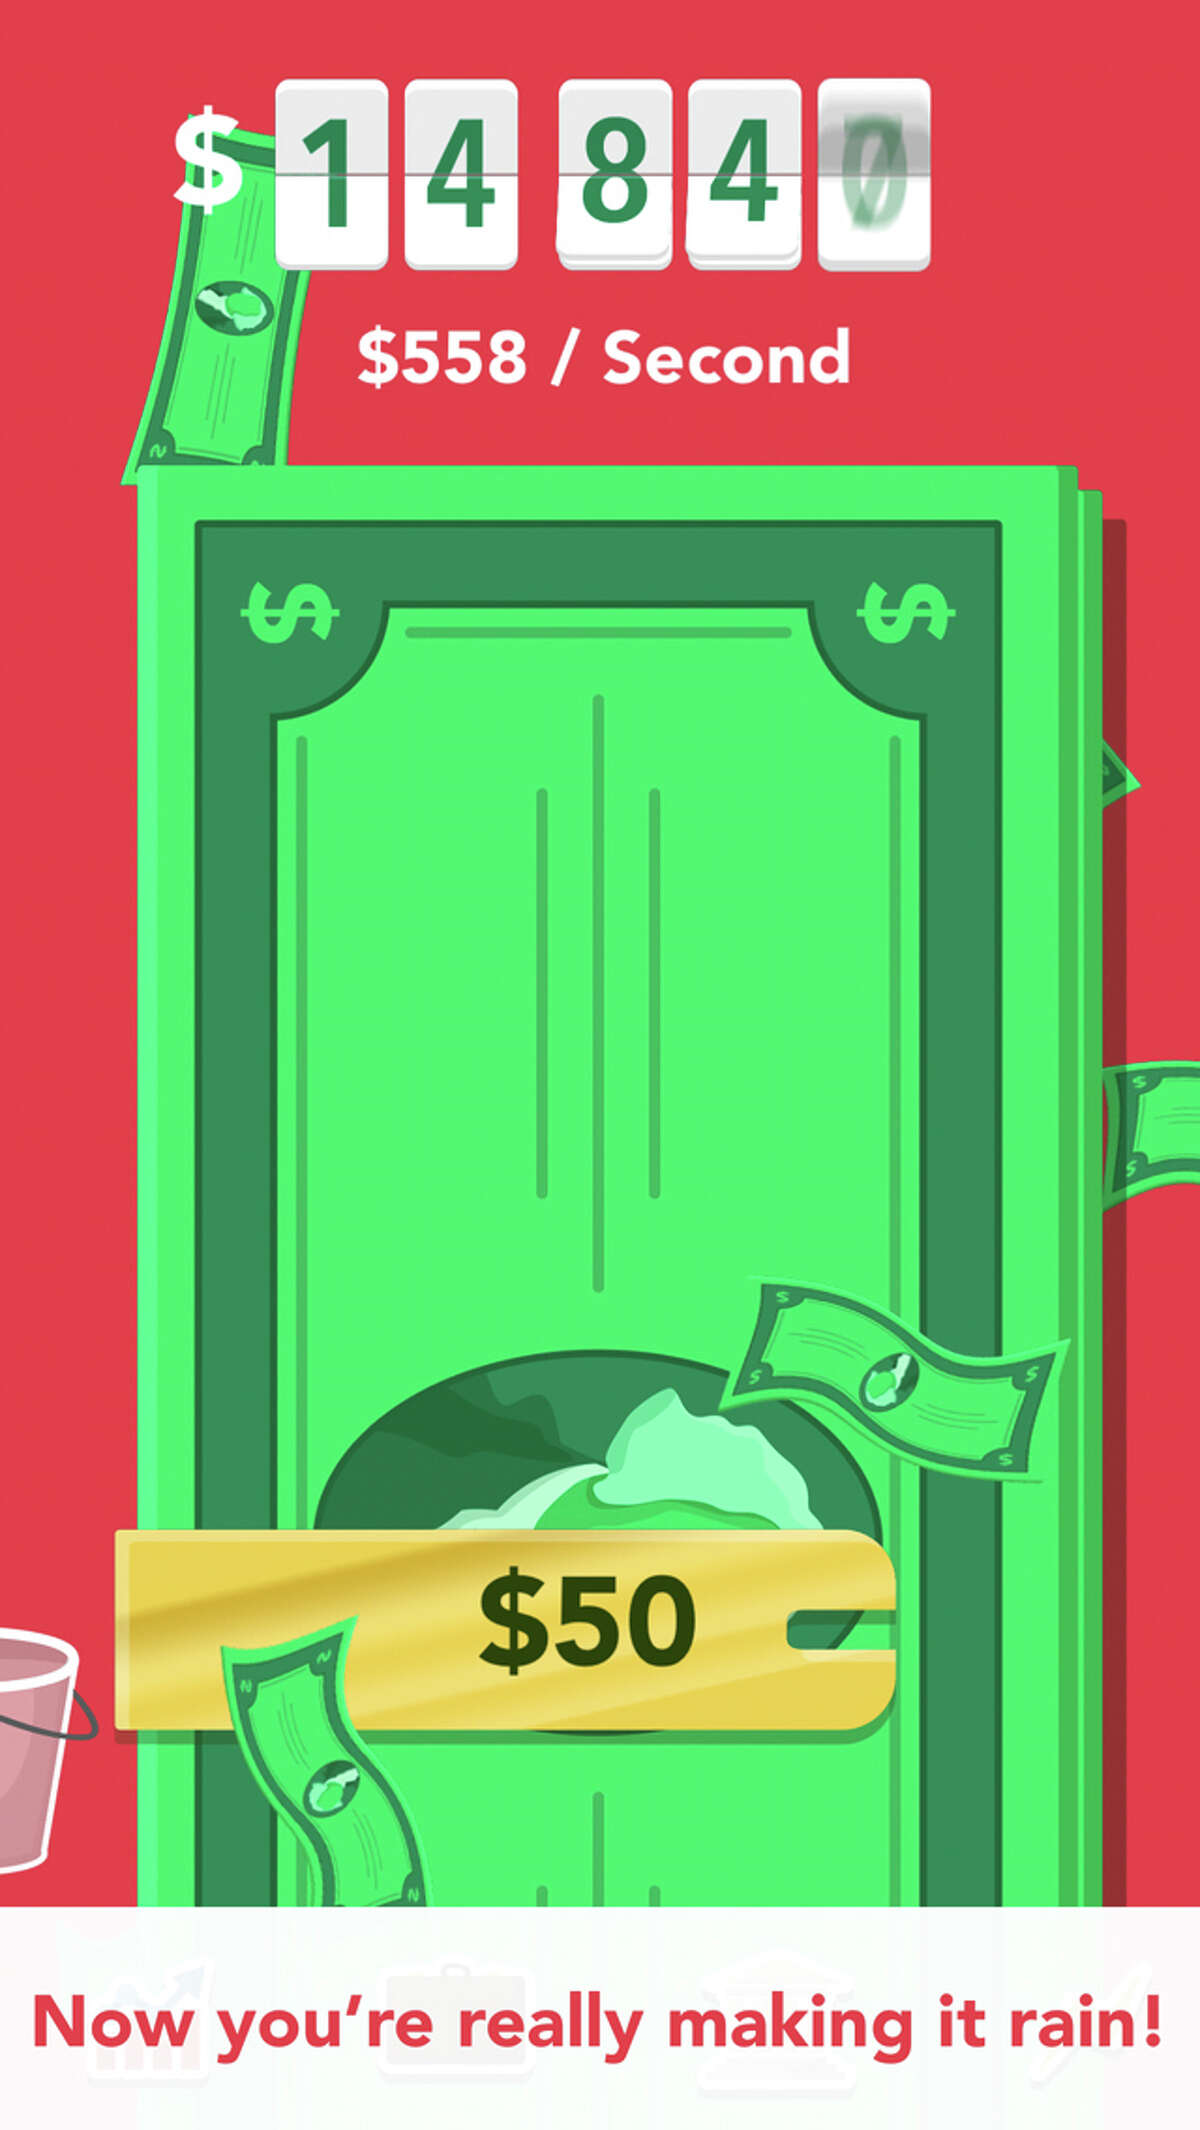 "Make It Rain: The Love of Money," a popular free game for iPhones, is designed as an interactive satire to make points about how corrupting financial markets can be.